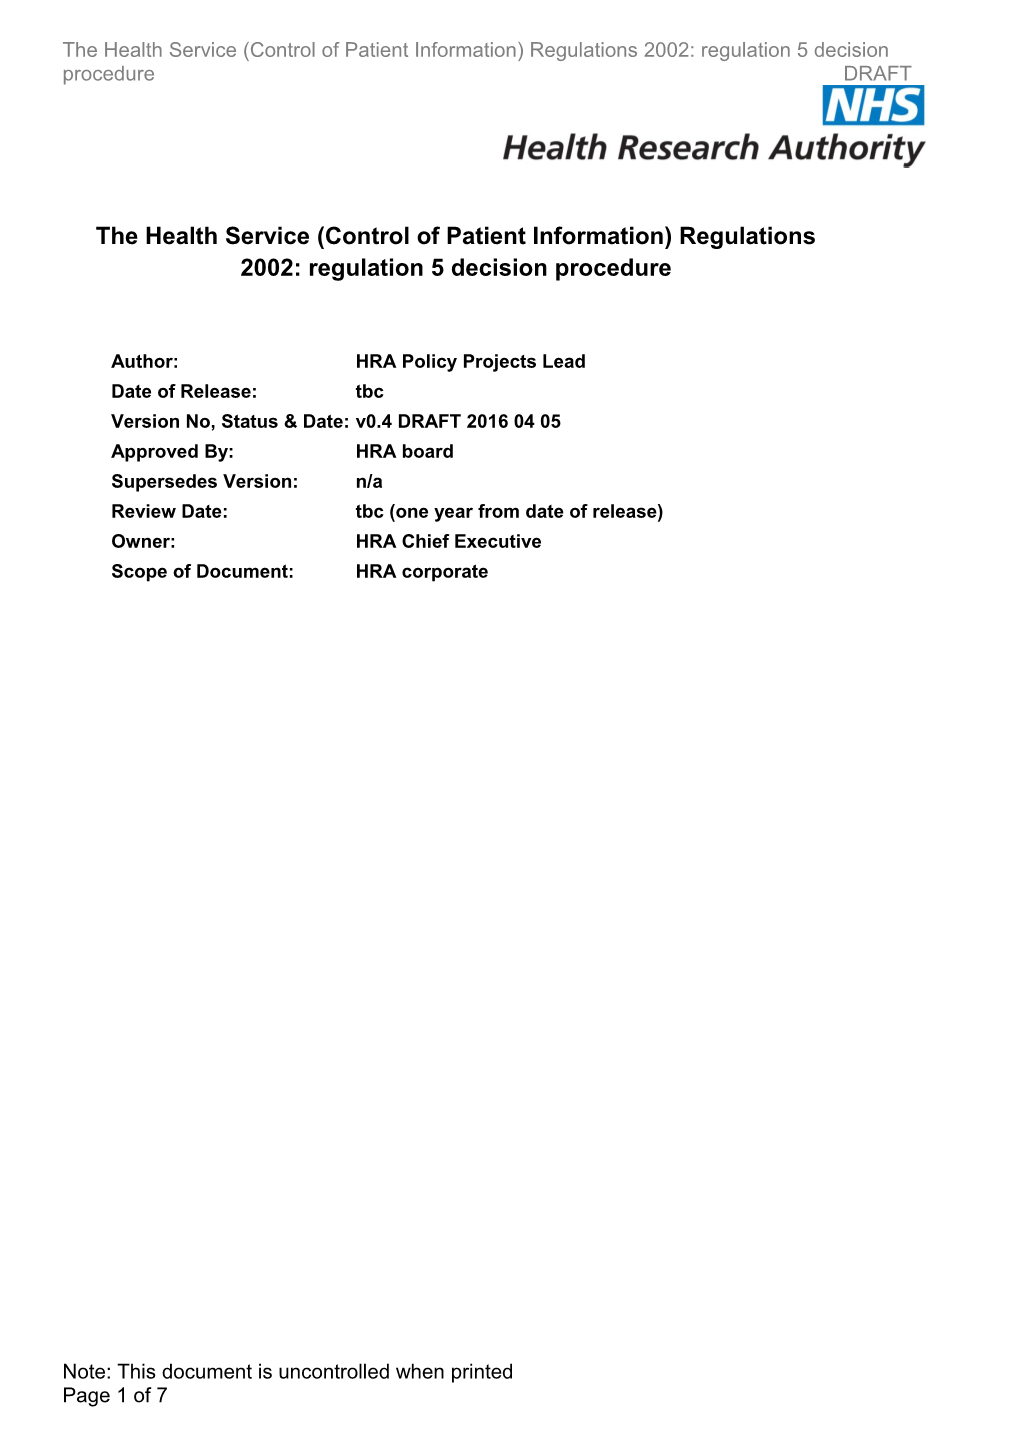 The Health Service (Control of Patient Information) Regulations 2002: Regulation 5 Decision